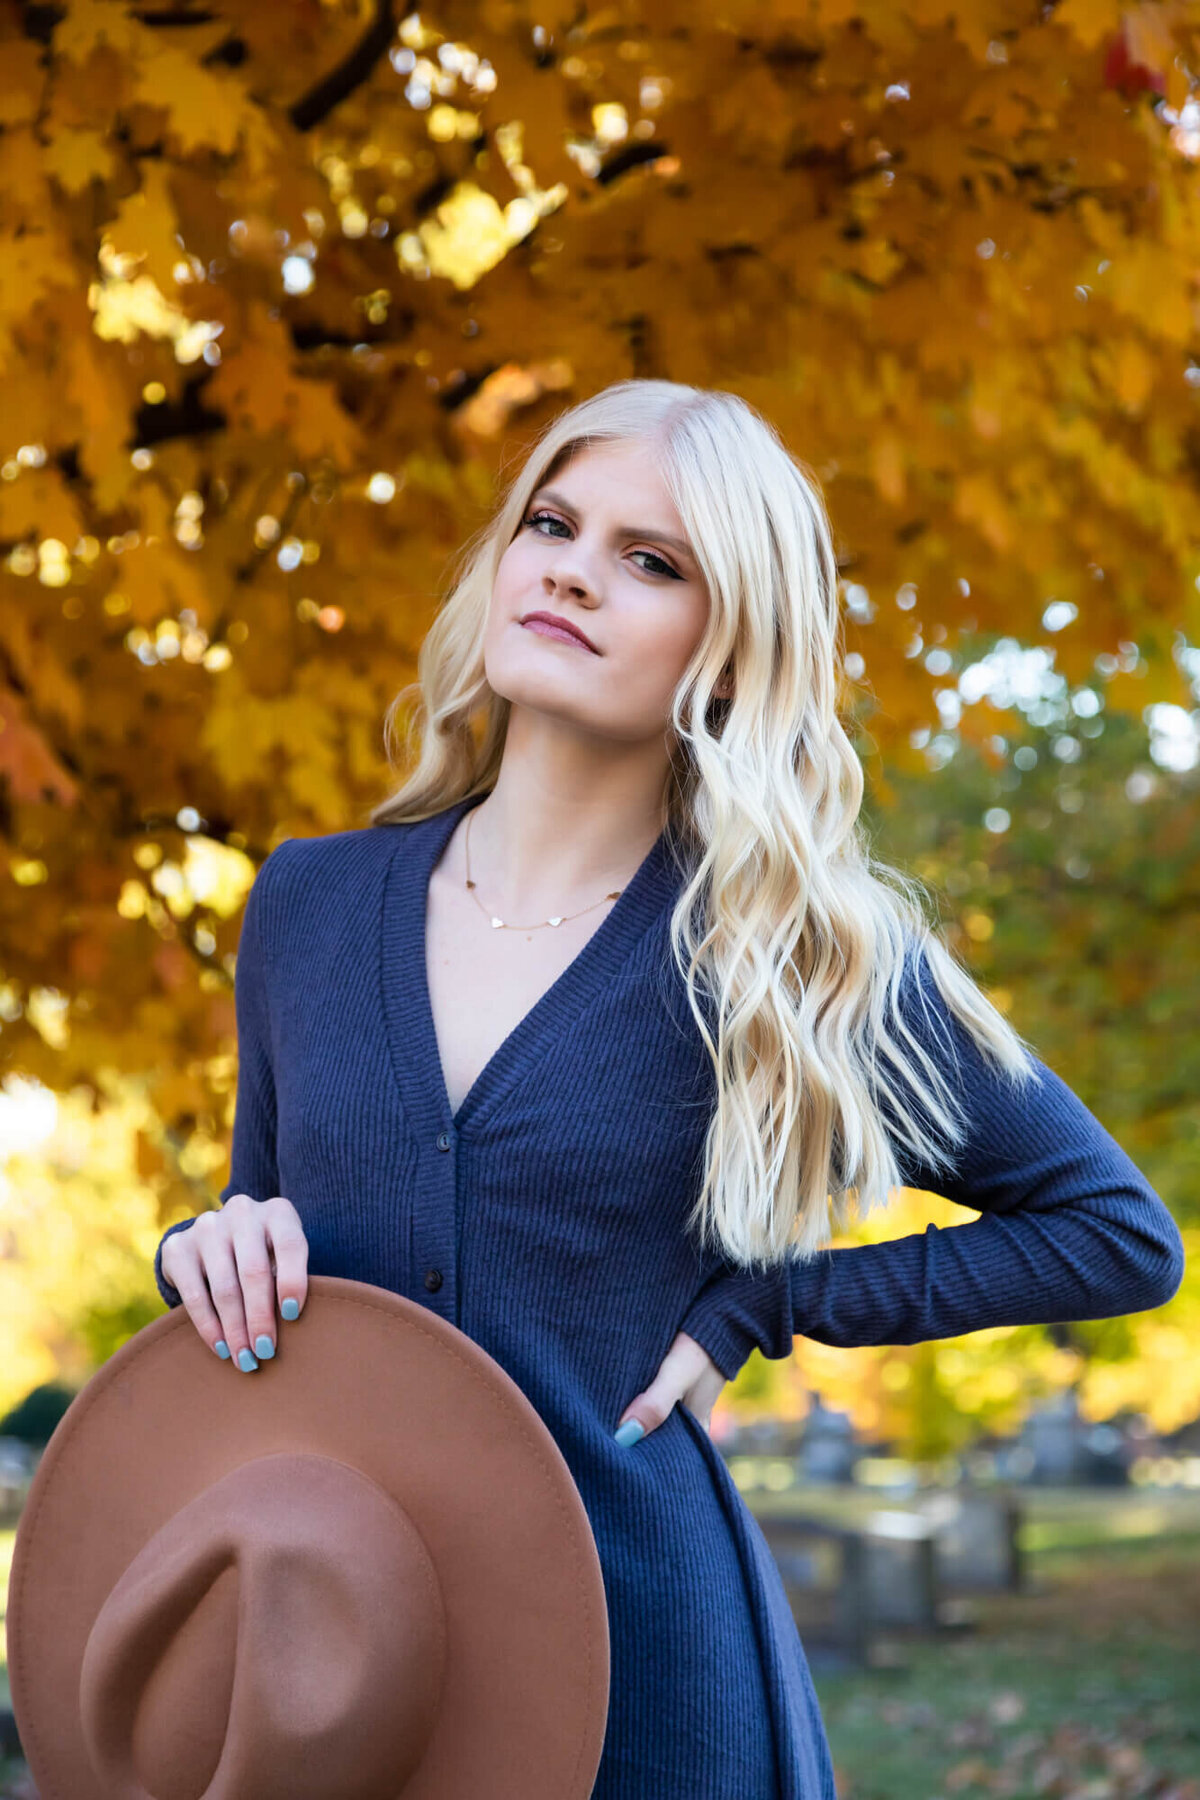 A lovely senior portrait of a beautiful blonde girl wearing a blue dress and posing with a brown hat in front of golden Fall leaves. Captured by Springfield, MO senior photographer Dynae Levingston.